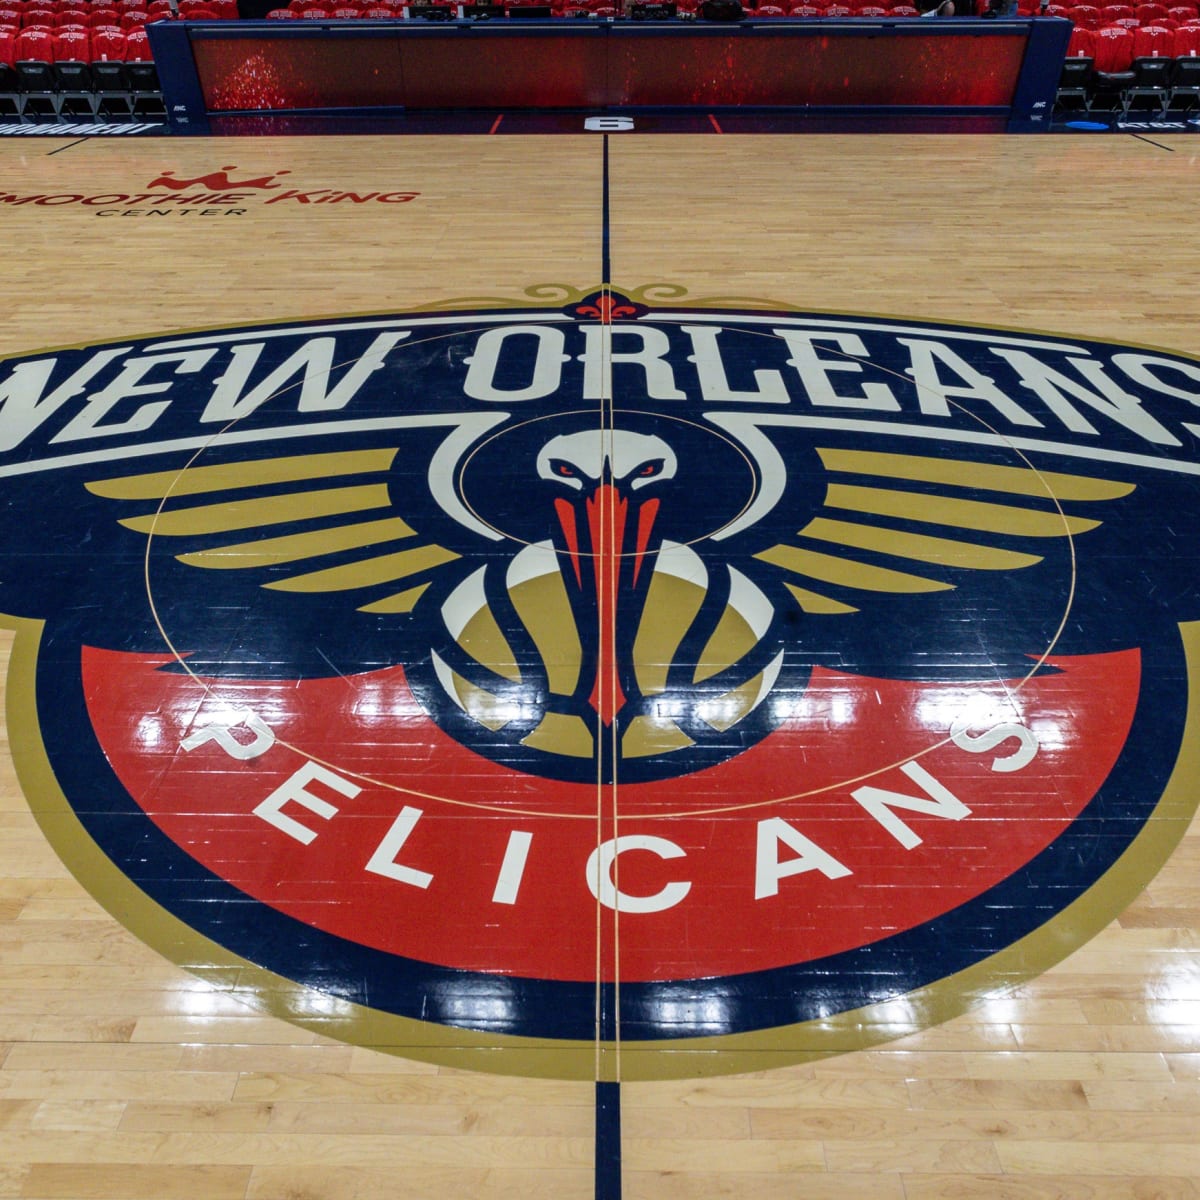 Free New Orleans Pelicans Basketball Tickets